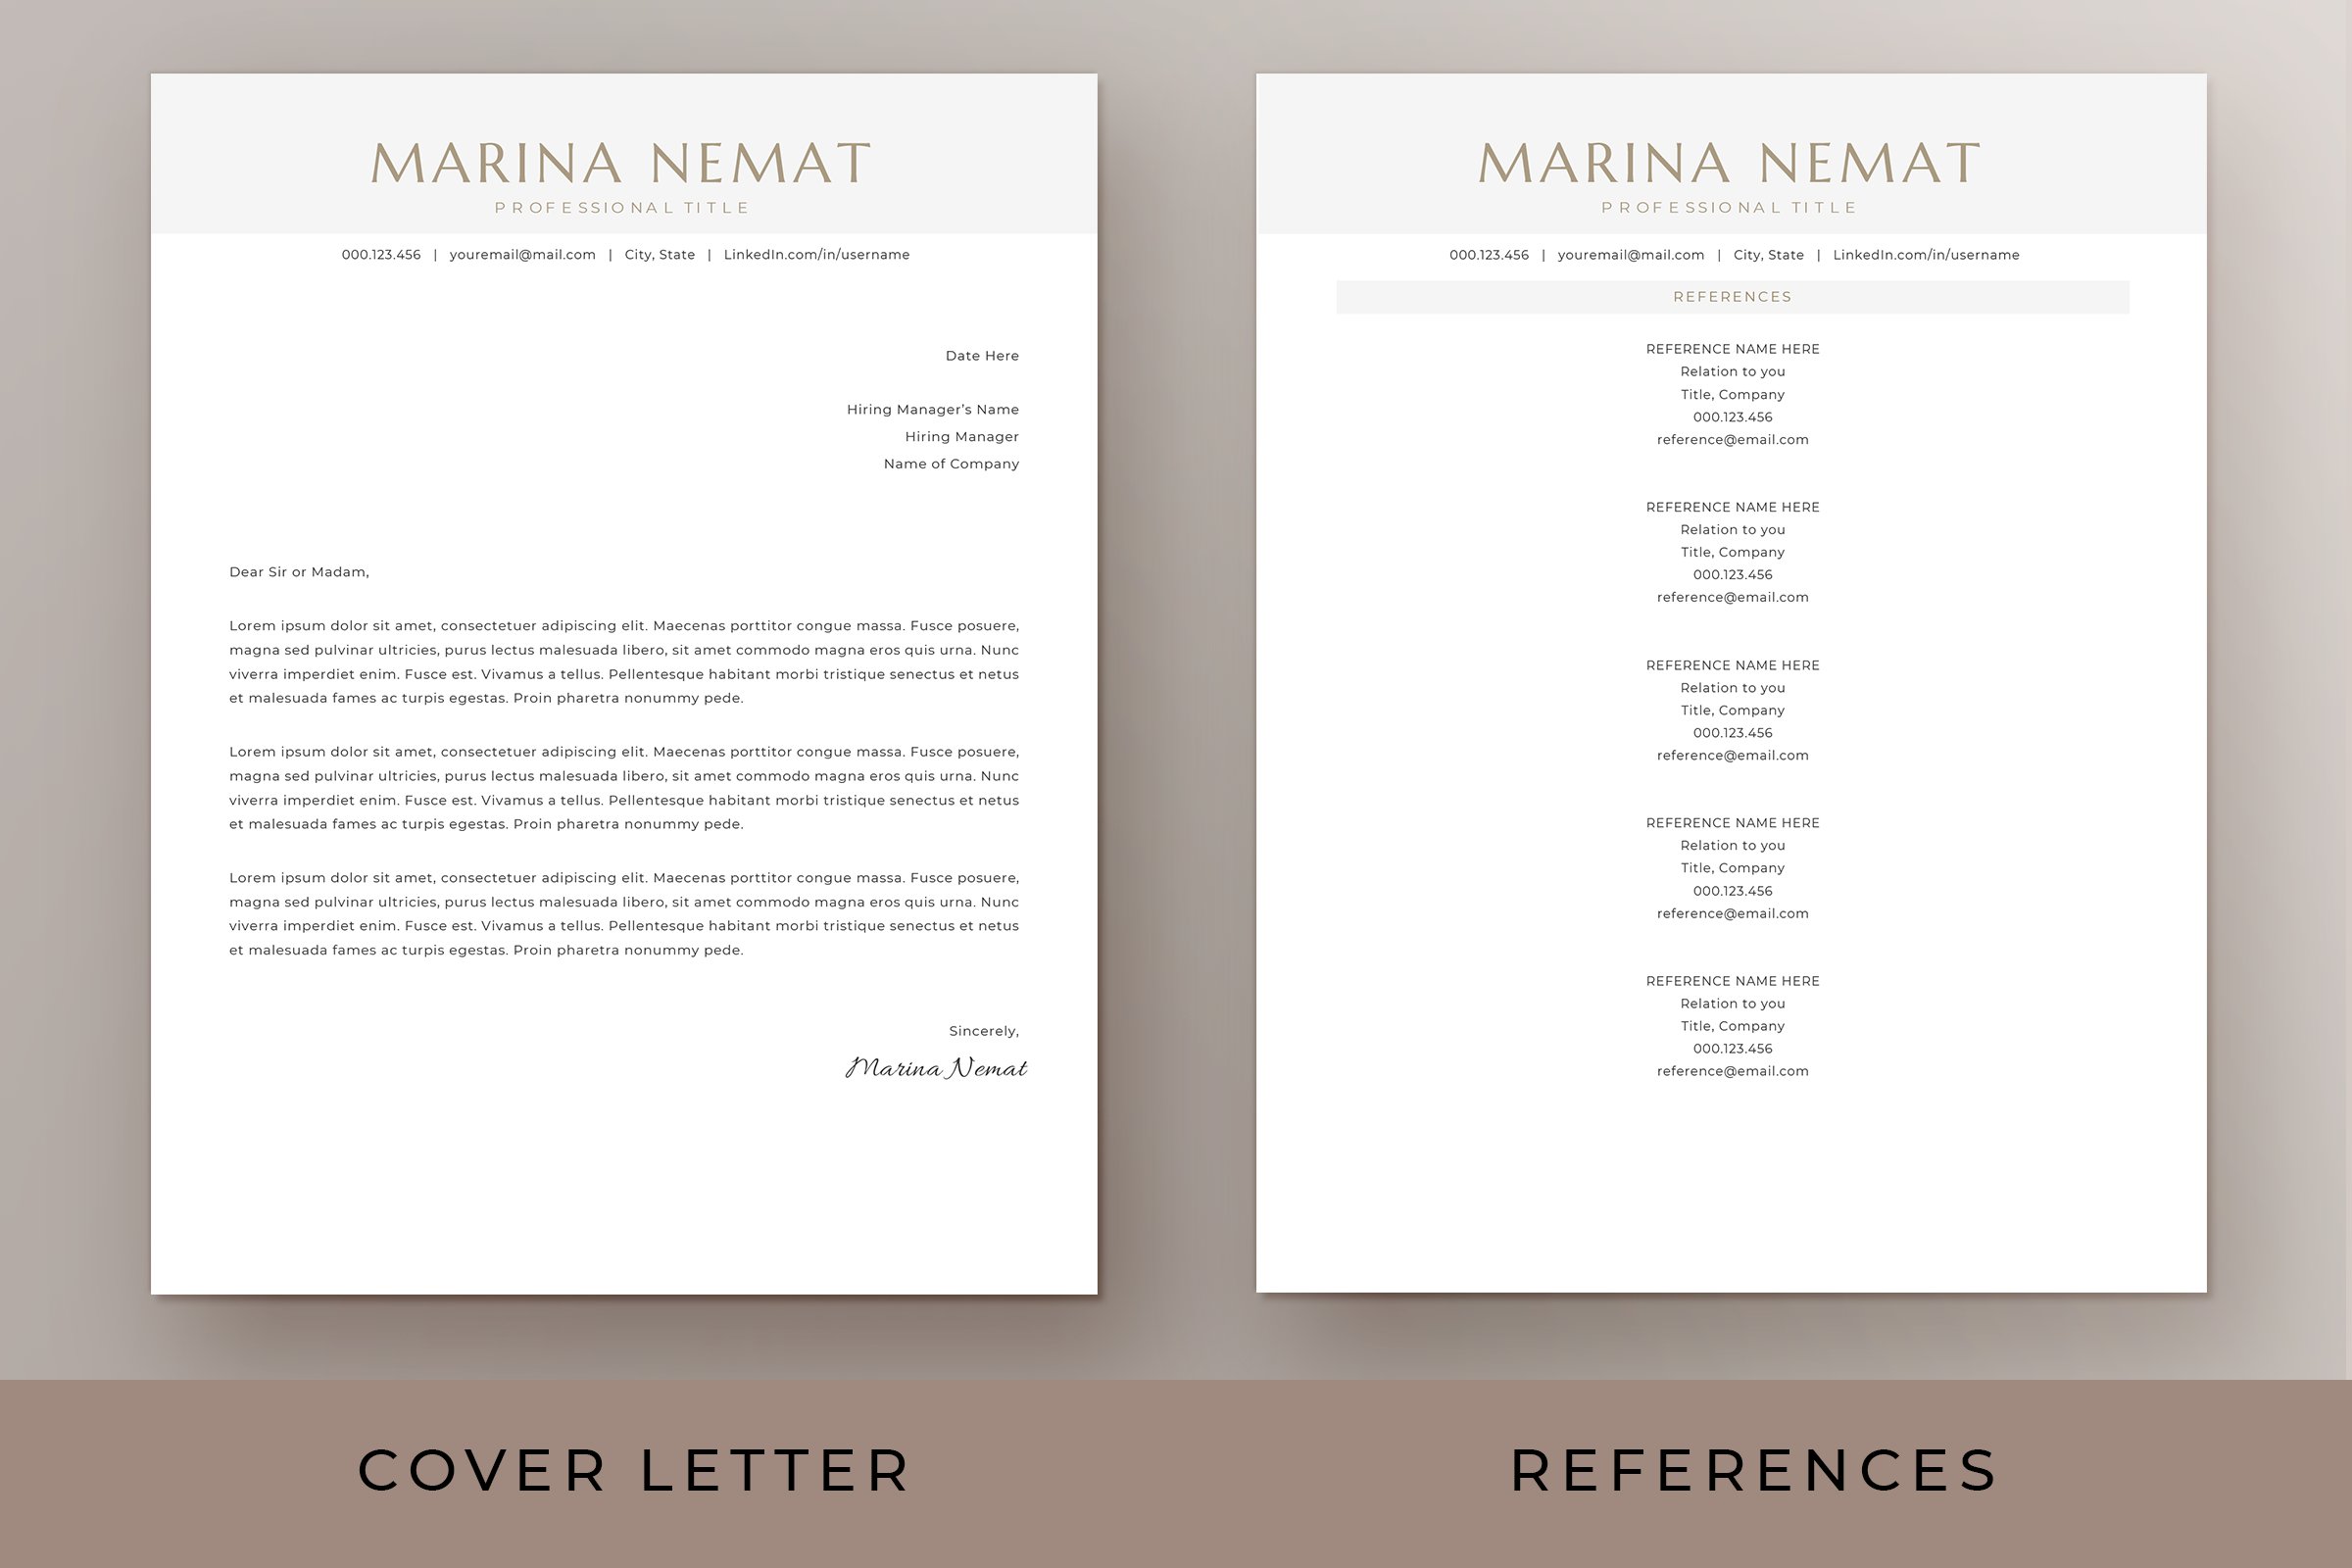 Cover letter and a reference page for a resume.